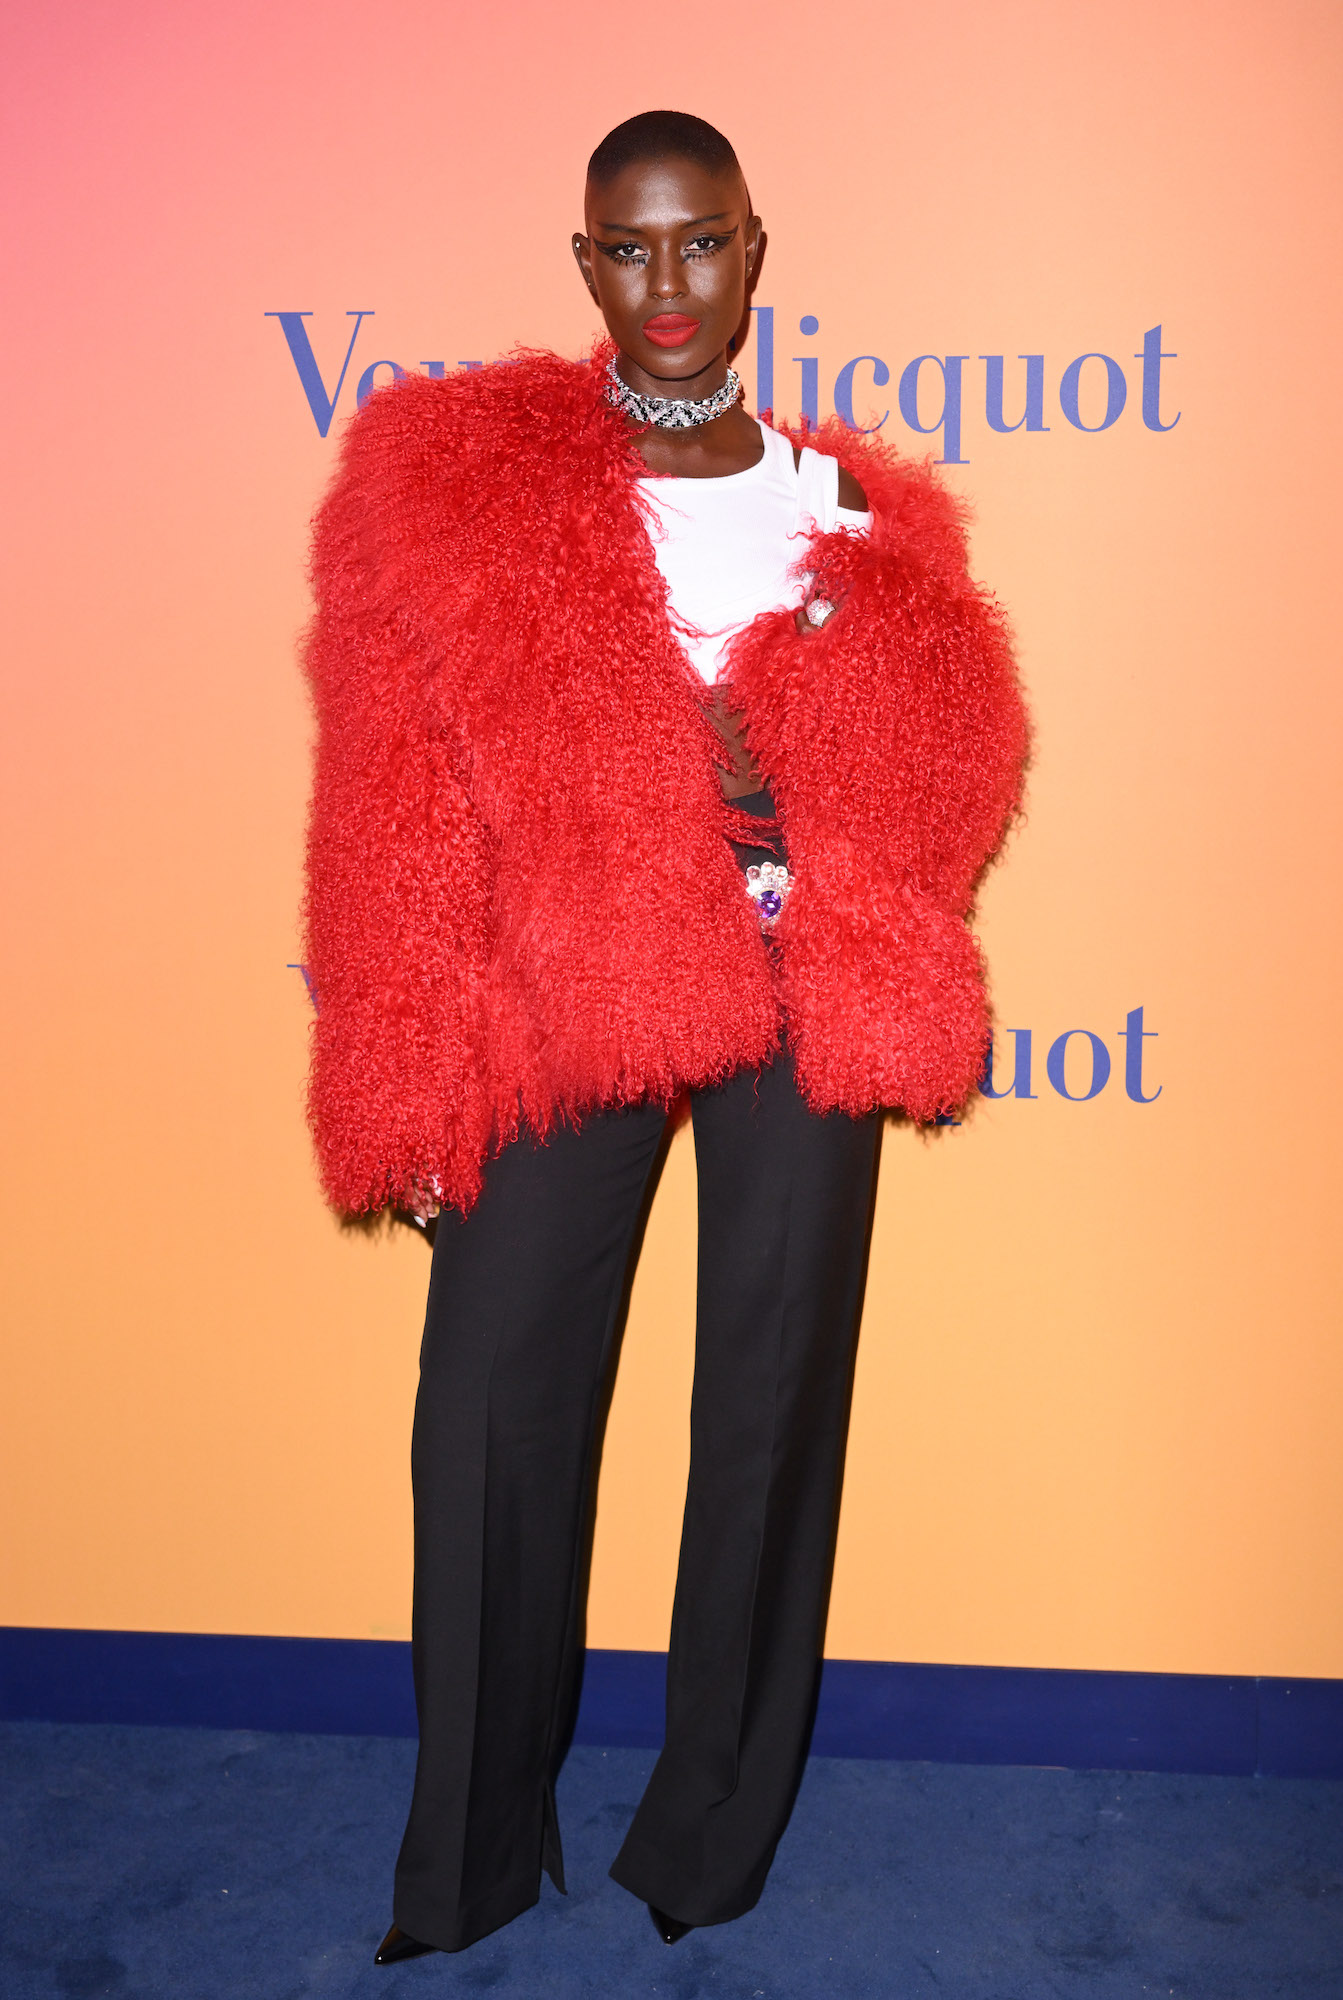 Actress and Model Jodie Turner-Smith attends Global Intimates and News  Photo - Getty Images